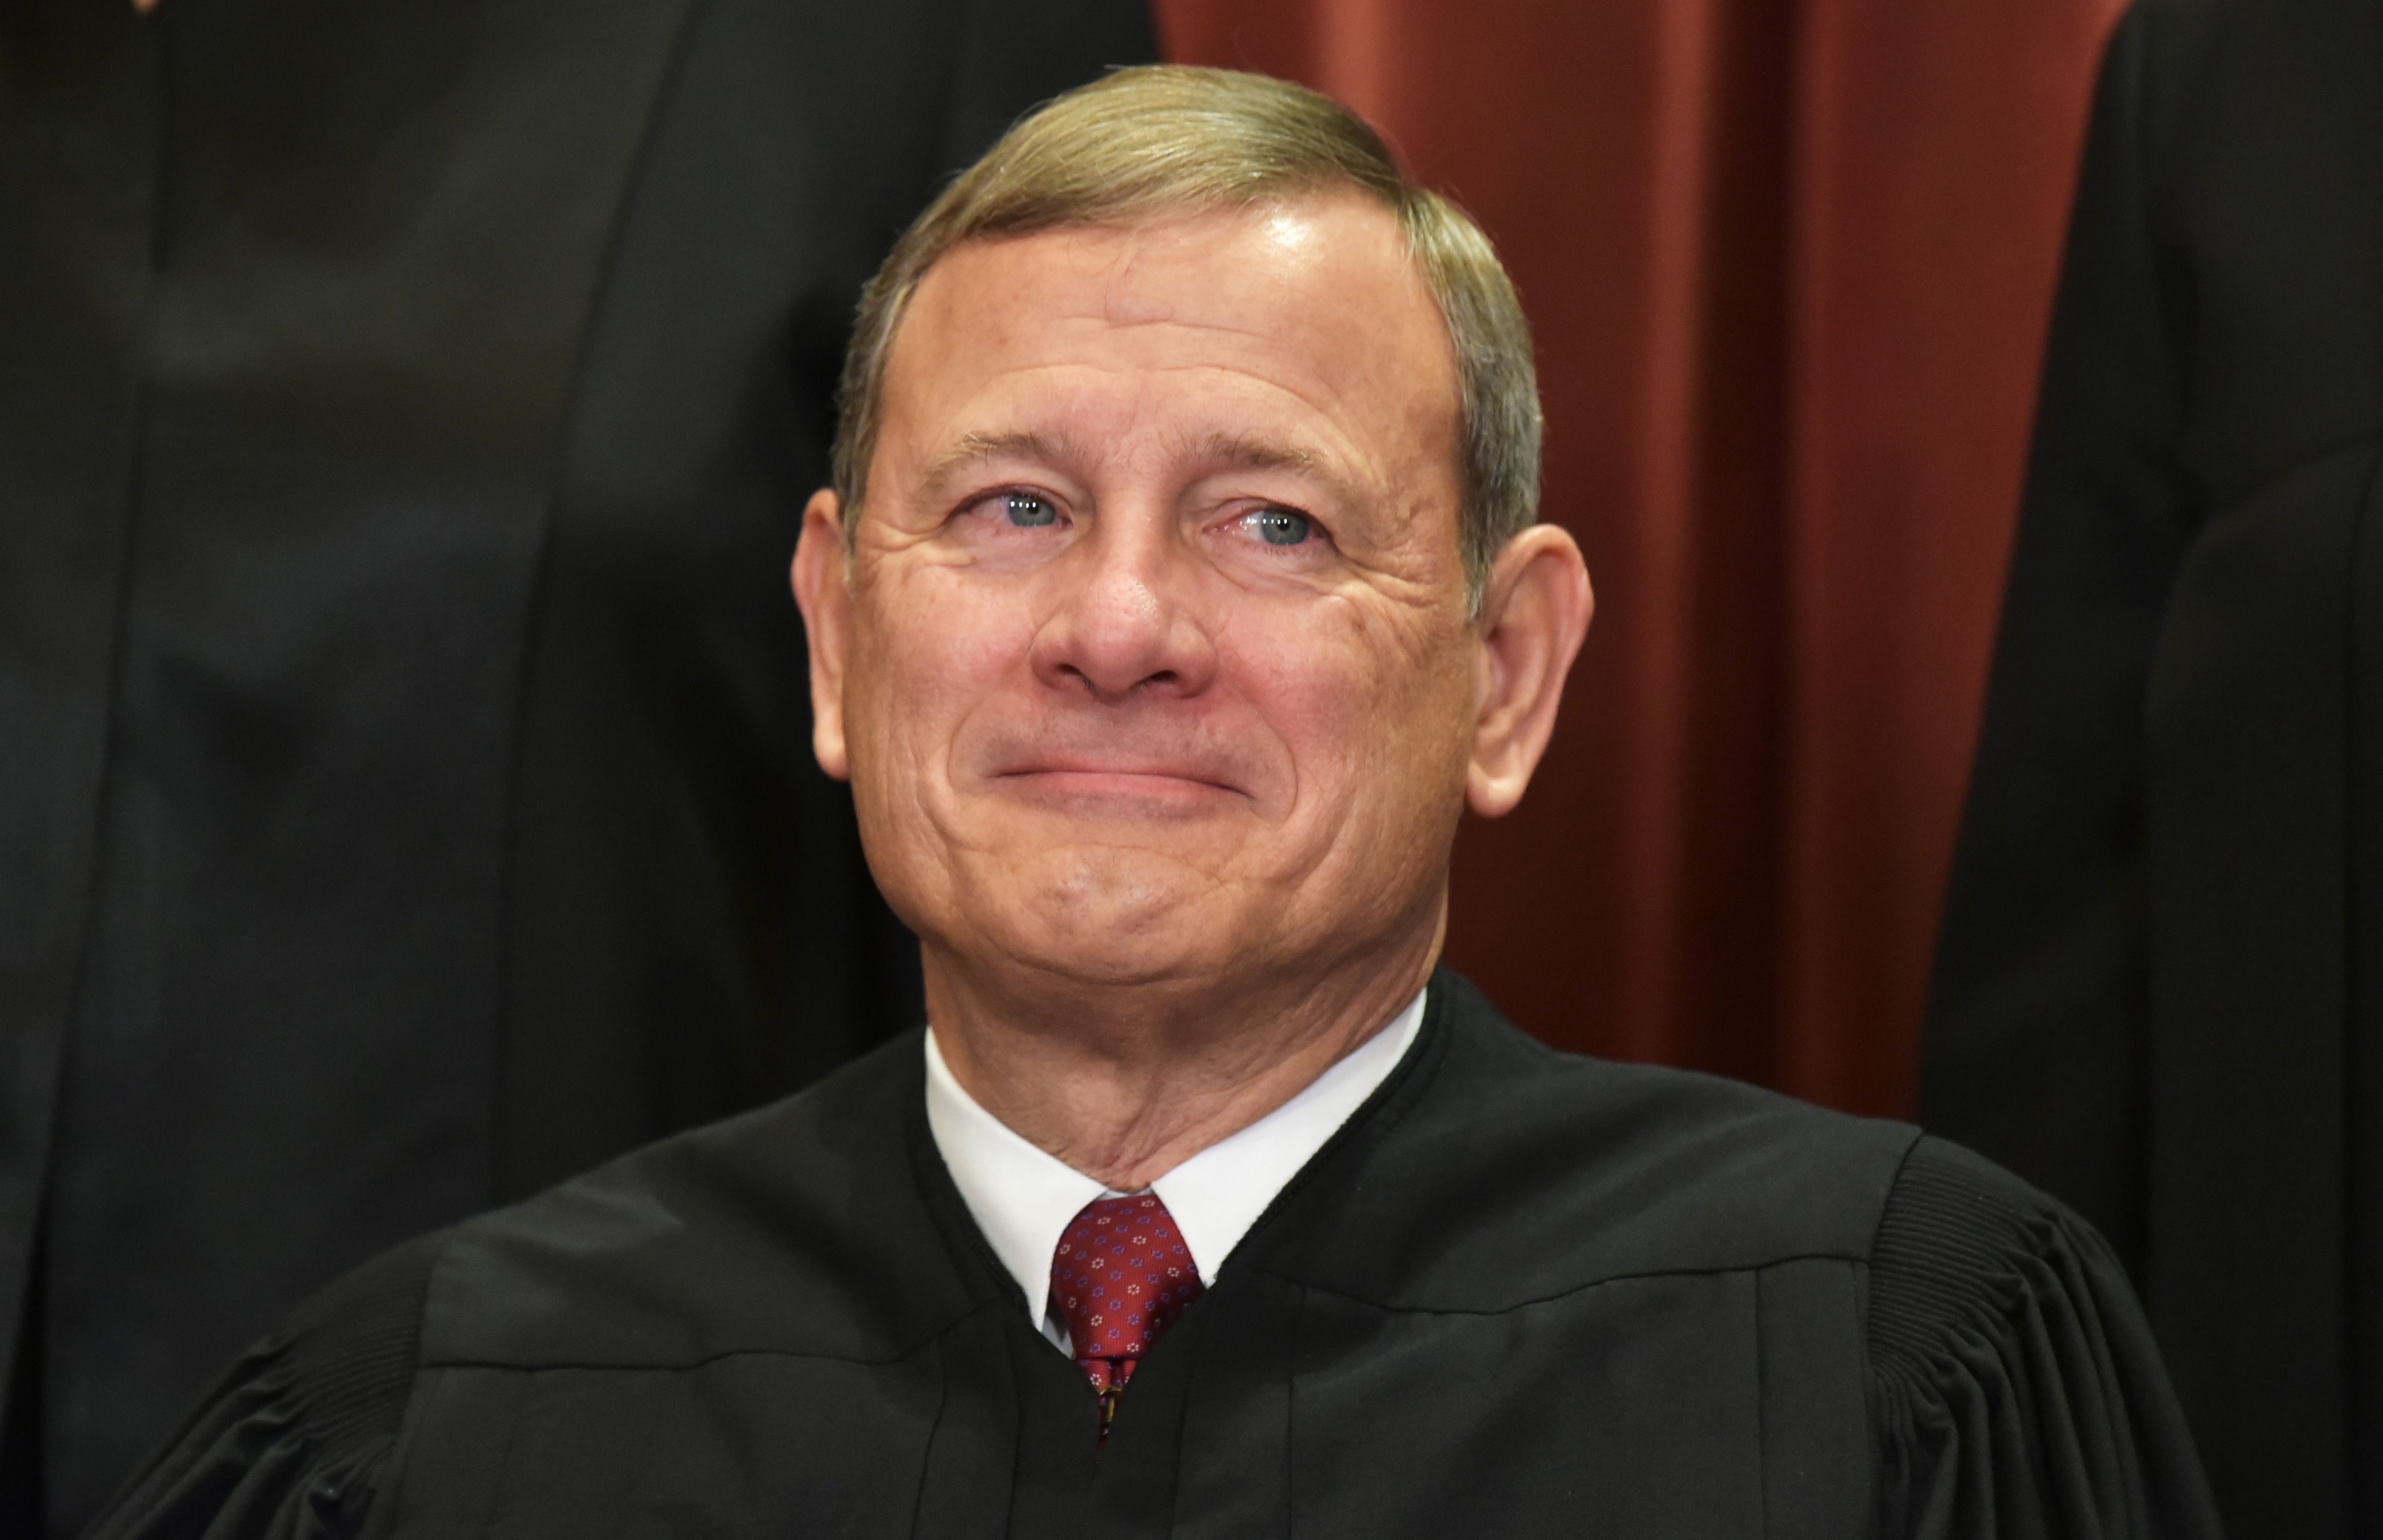 Chief Justice John Roberts at the Supreme Court on November 30, 2018. (Mandel Ngan/AFP/Getty Images)